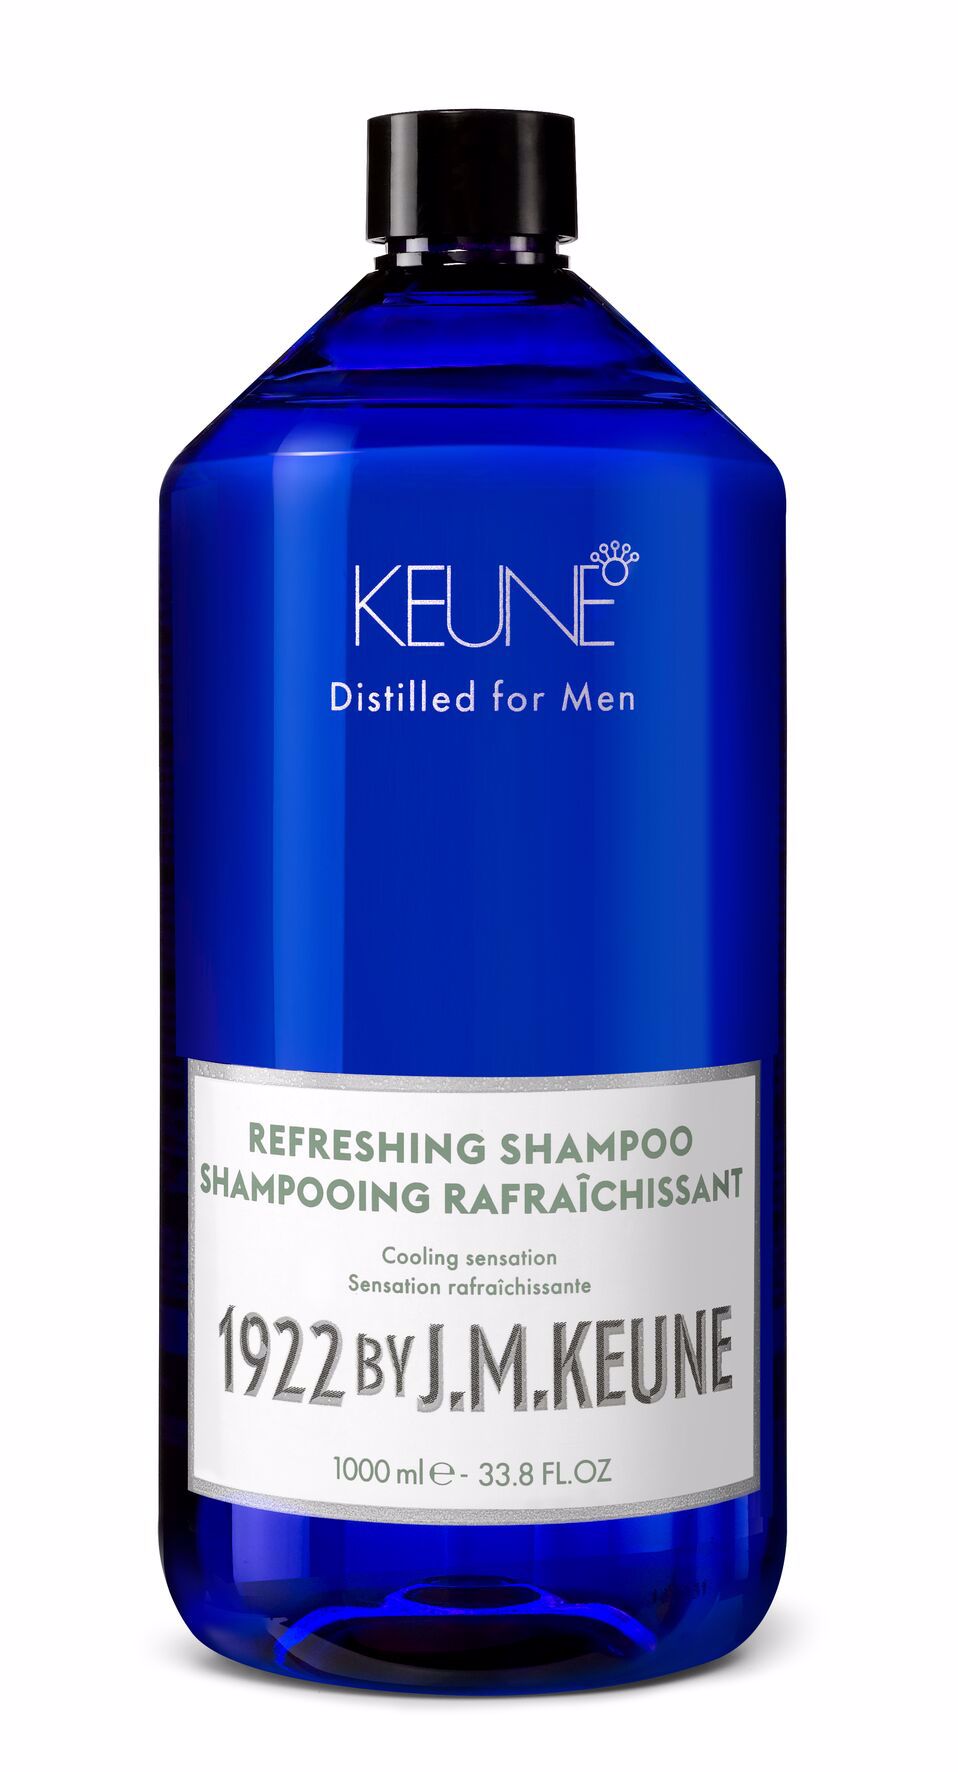 Discover the Refreshing Shampoo, perfect for all hair types. Enriched with creatine, it strengthens the hair and revitalizes the scalp. Now available on online hair shop keune.ch.